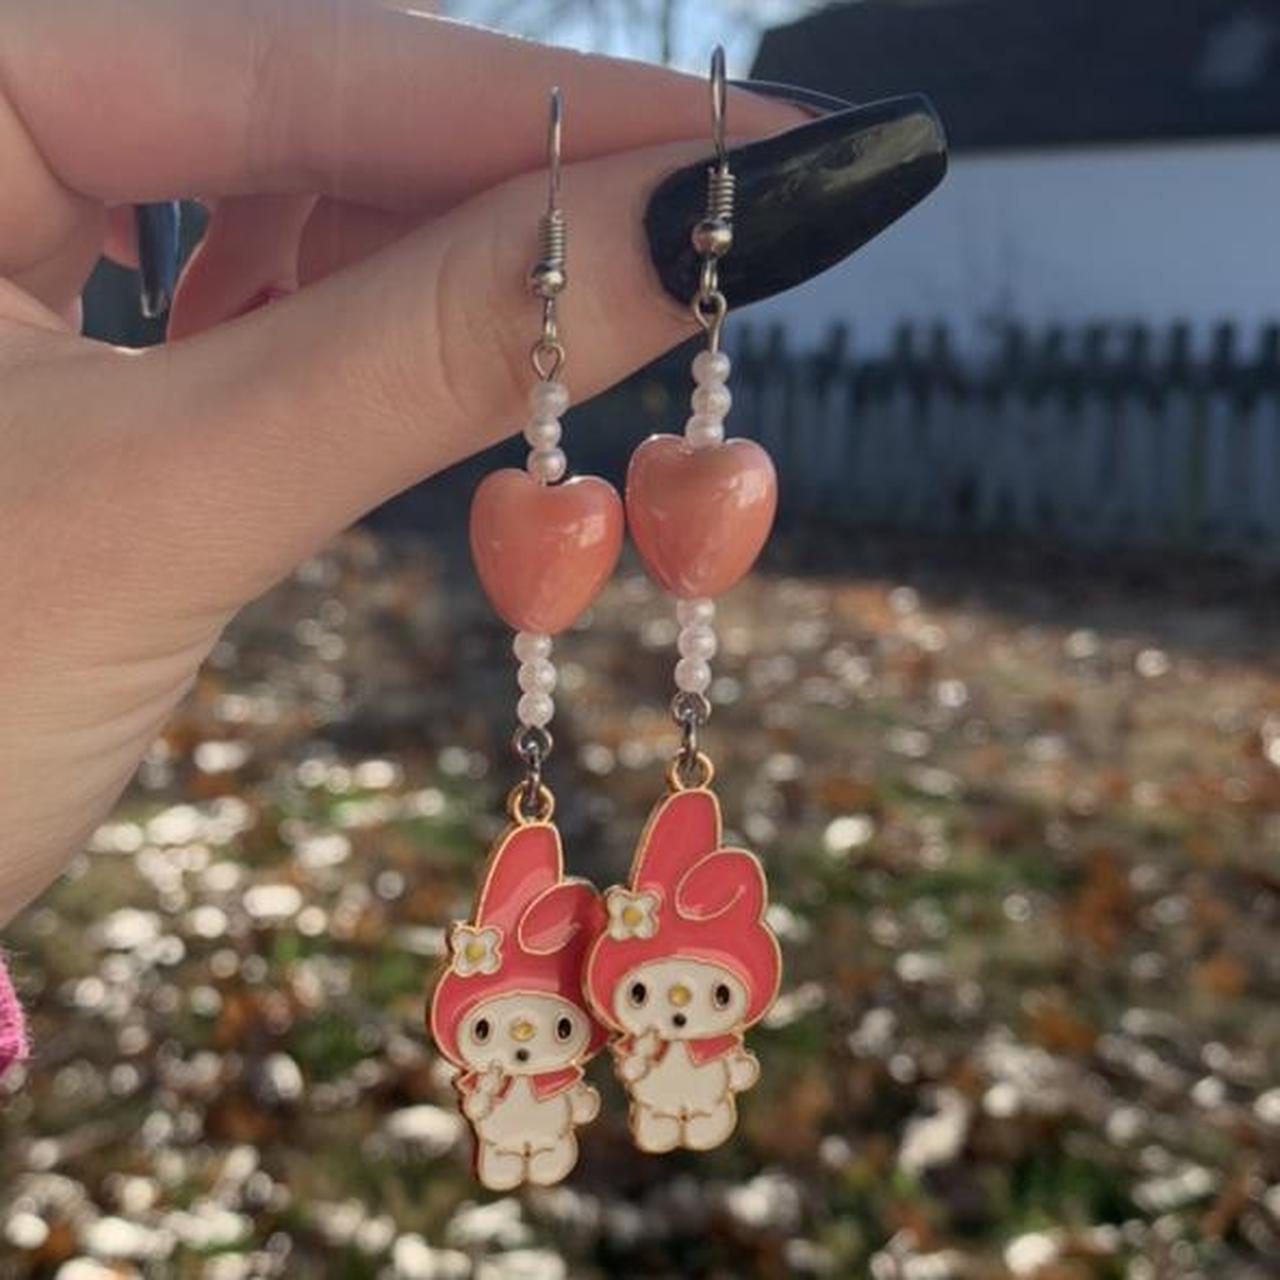 Product Image 1 - The my melody heartache earrings!